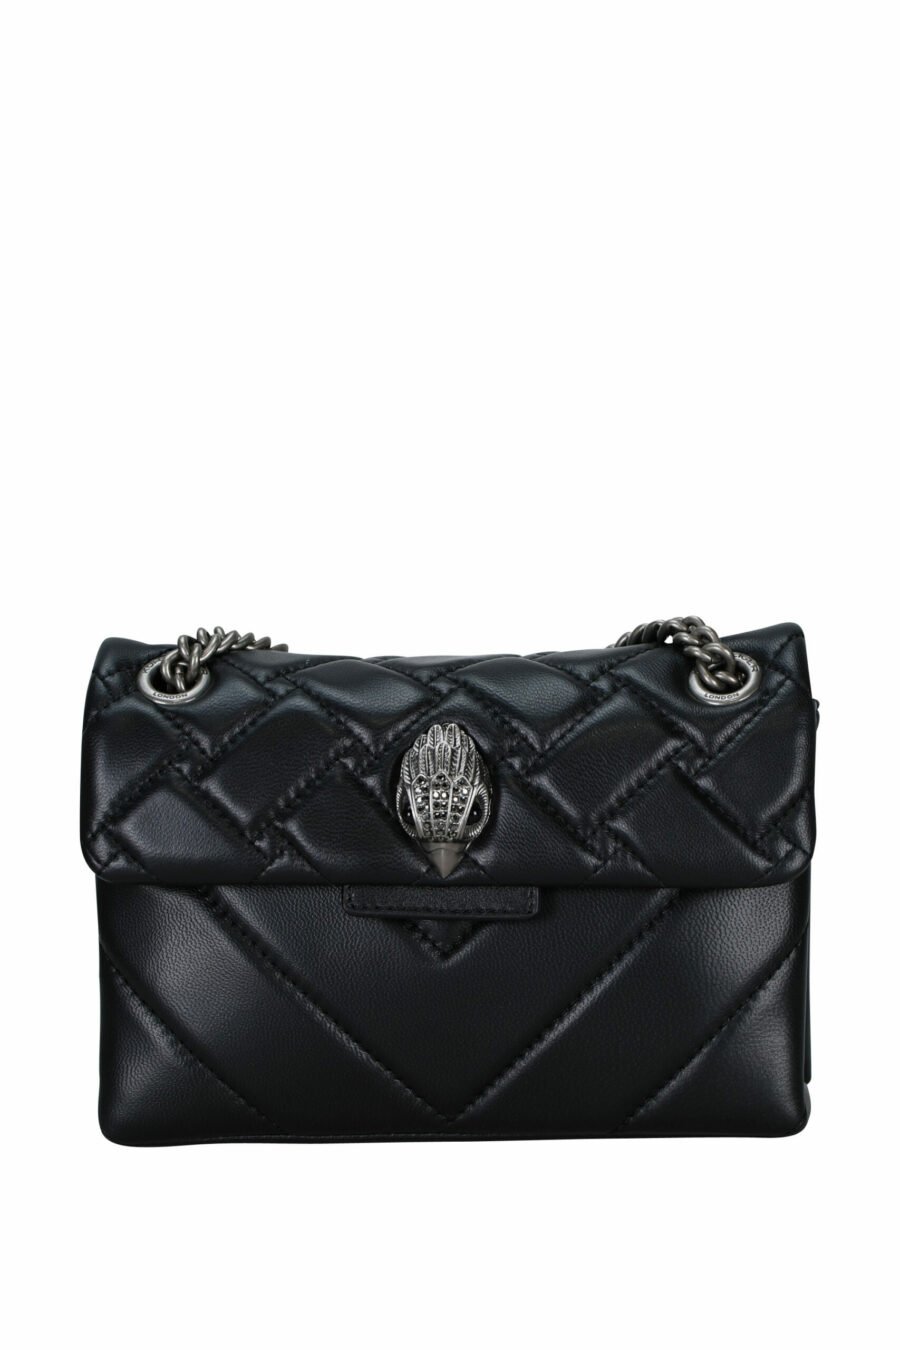 Mini black quilted shoulder bag with silver eagle logo with black crystals - 5045065997525 scaled